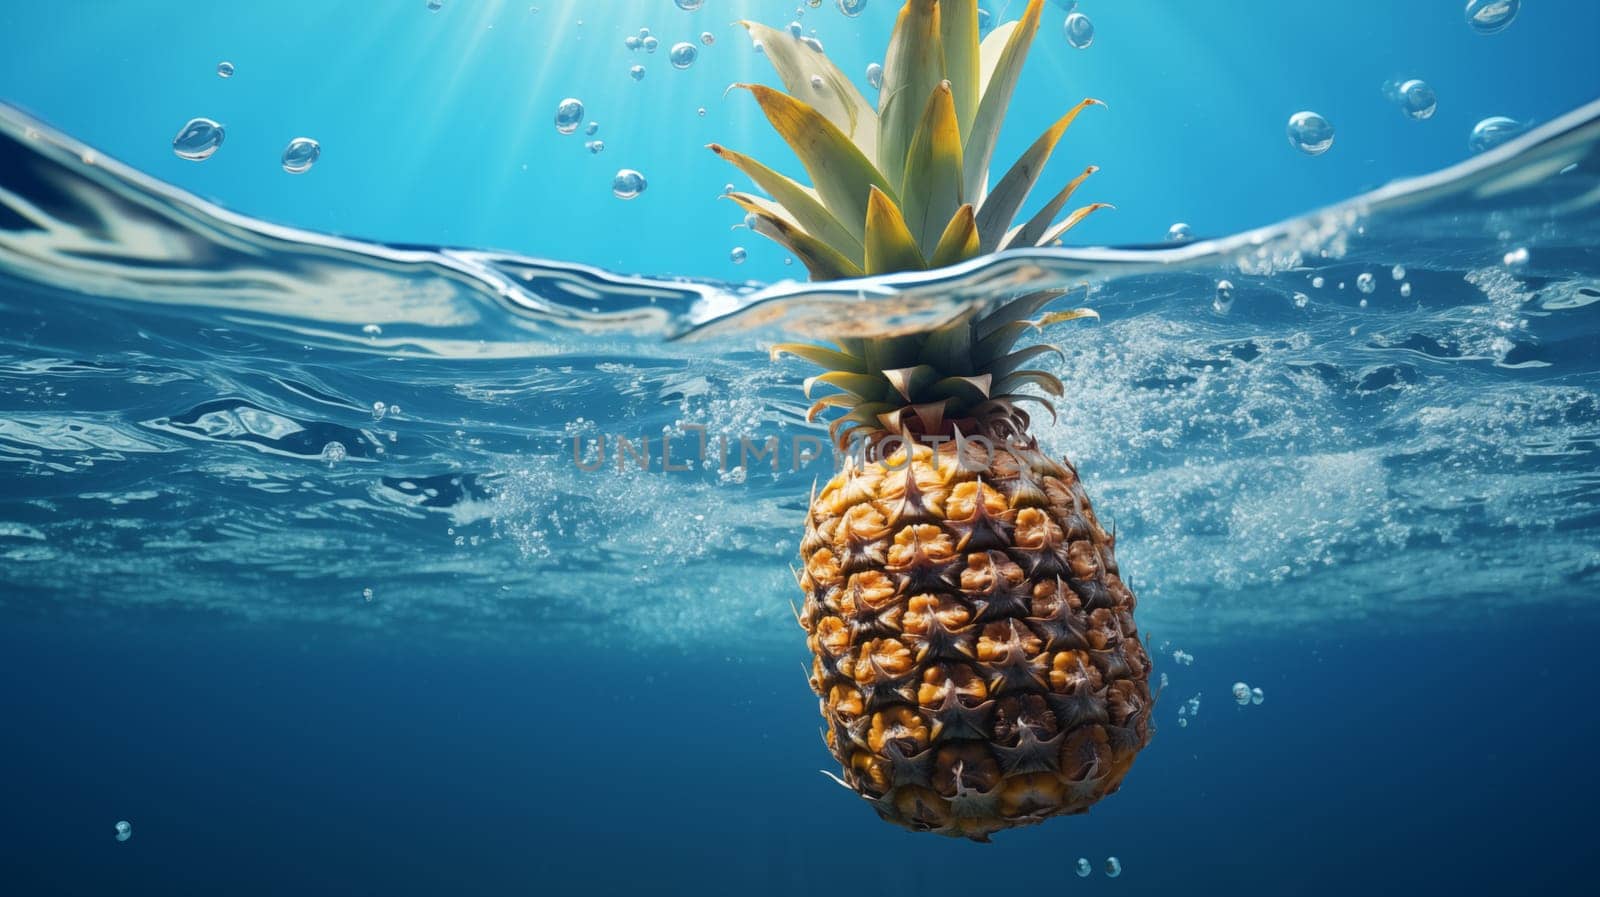 Fresh pineapple under blue water, with splashes and air bubbles. Close up